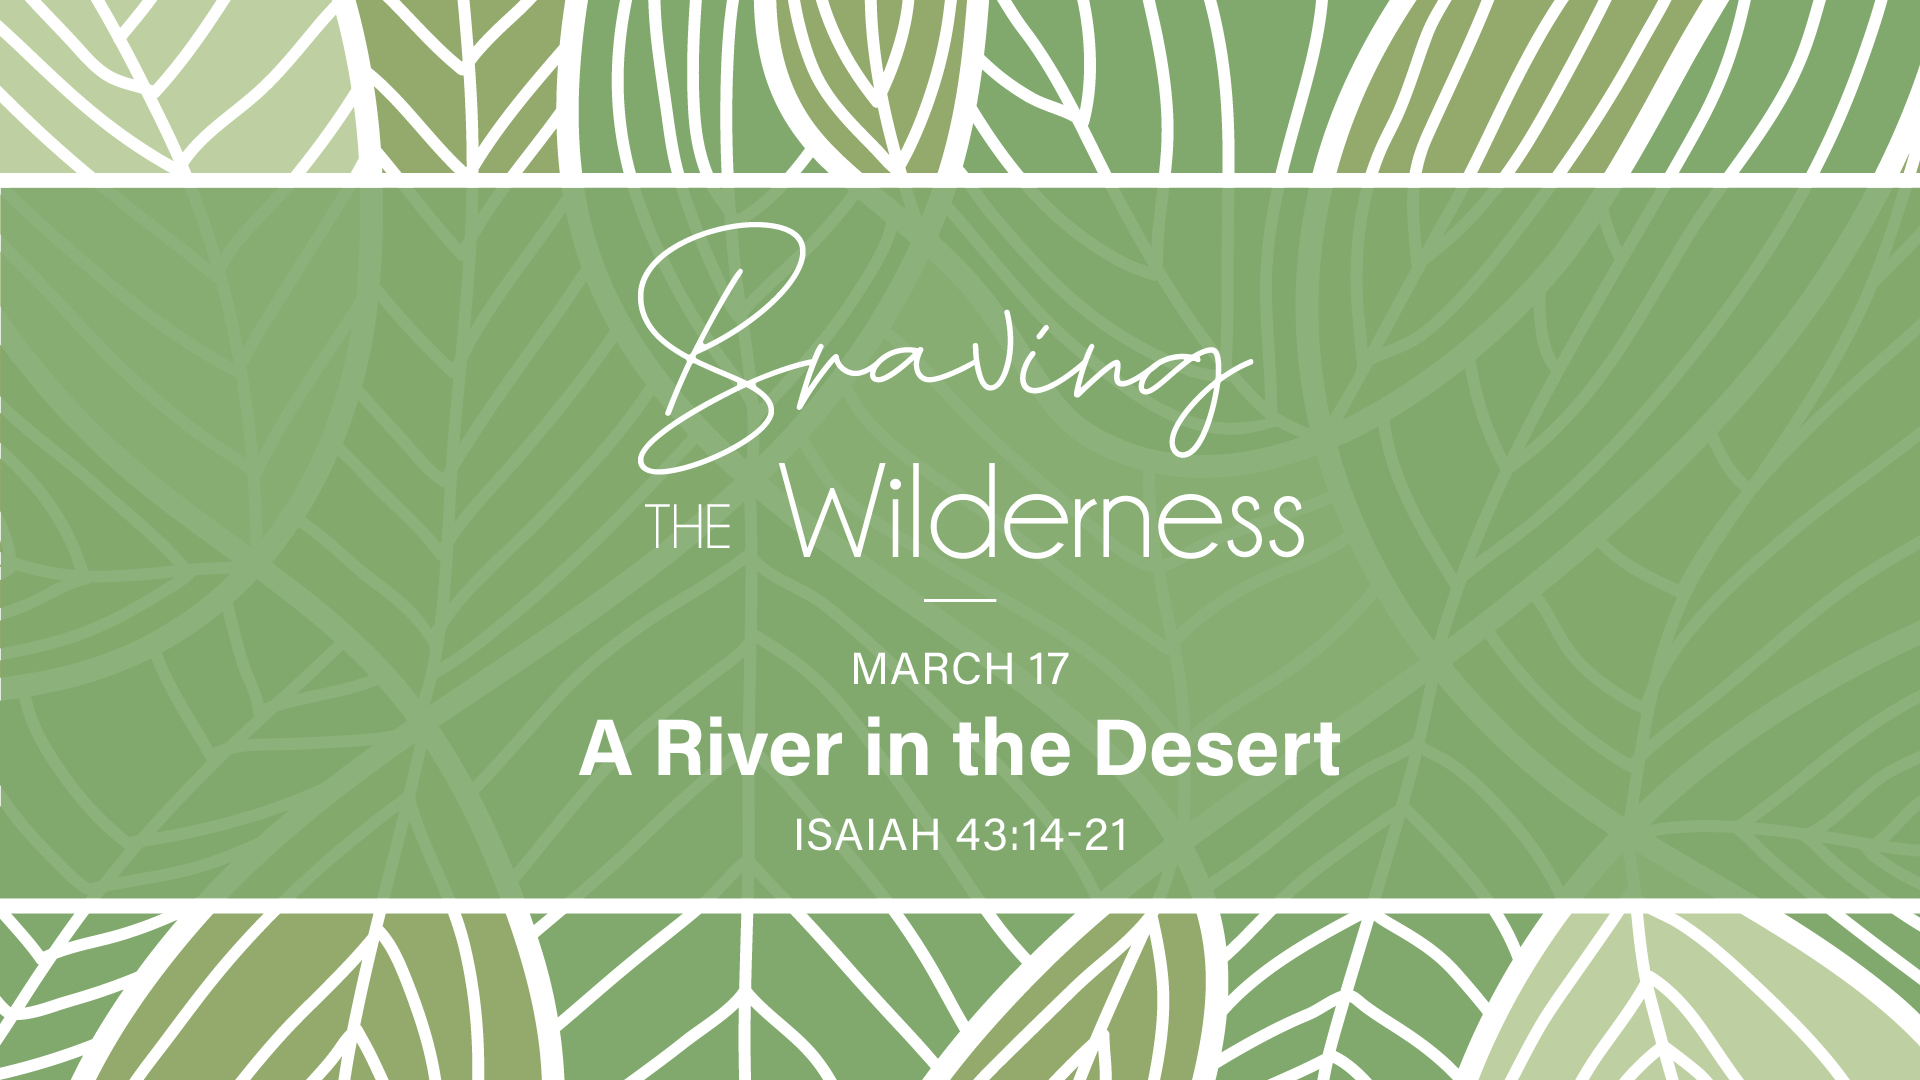 Braving the Wilderness: A River in the Desert